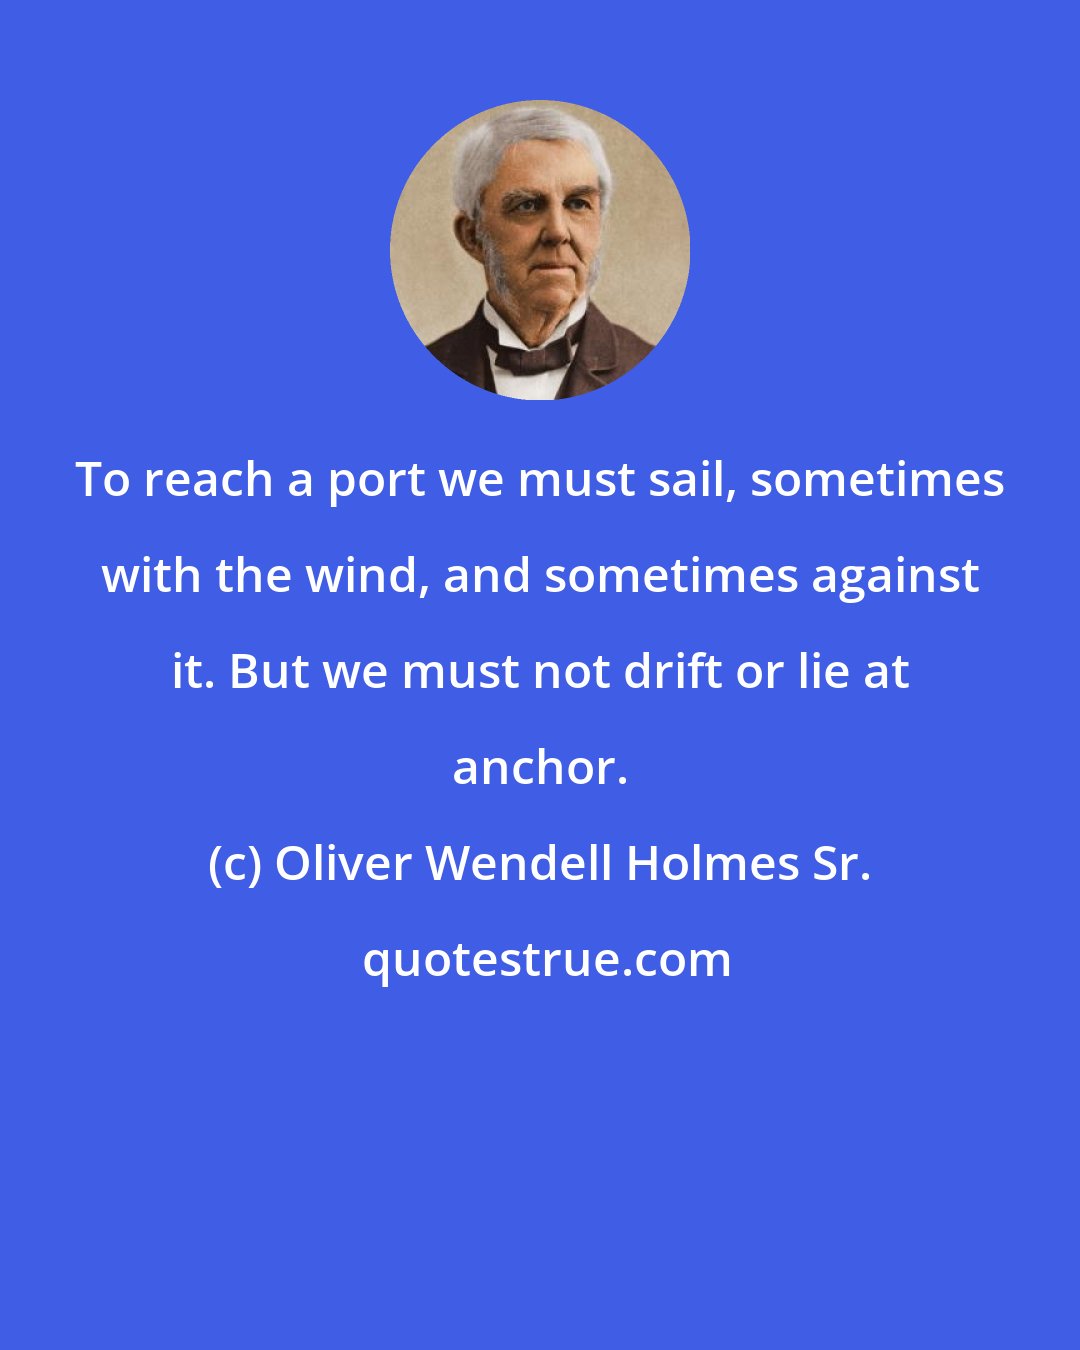 Oliver Wendell Holmes Sr.: To reach a port we must sail, sometimes with the wind, and sometimes against it. But we must not drift or lie at anchor.